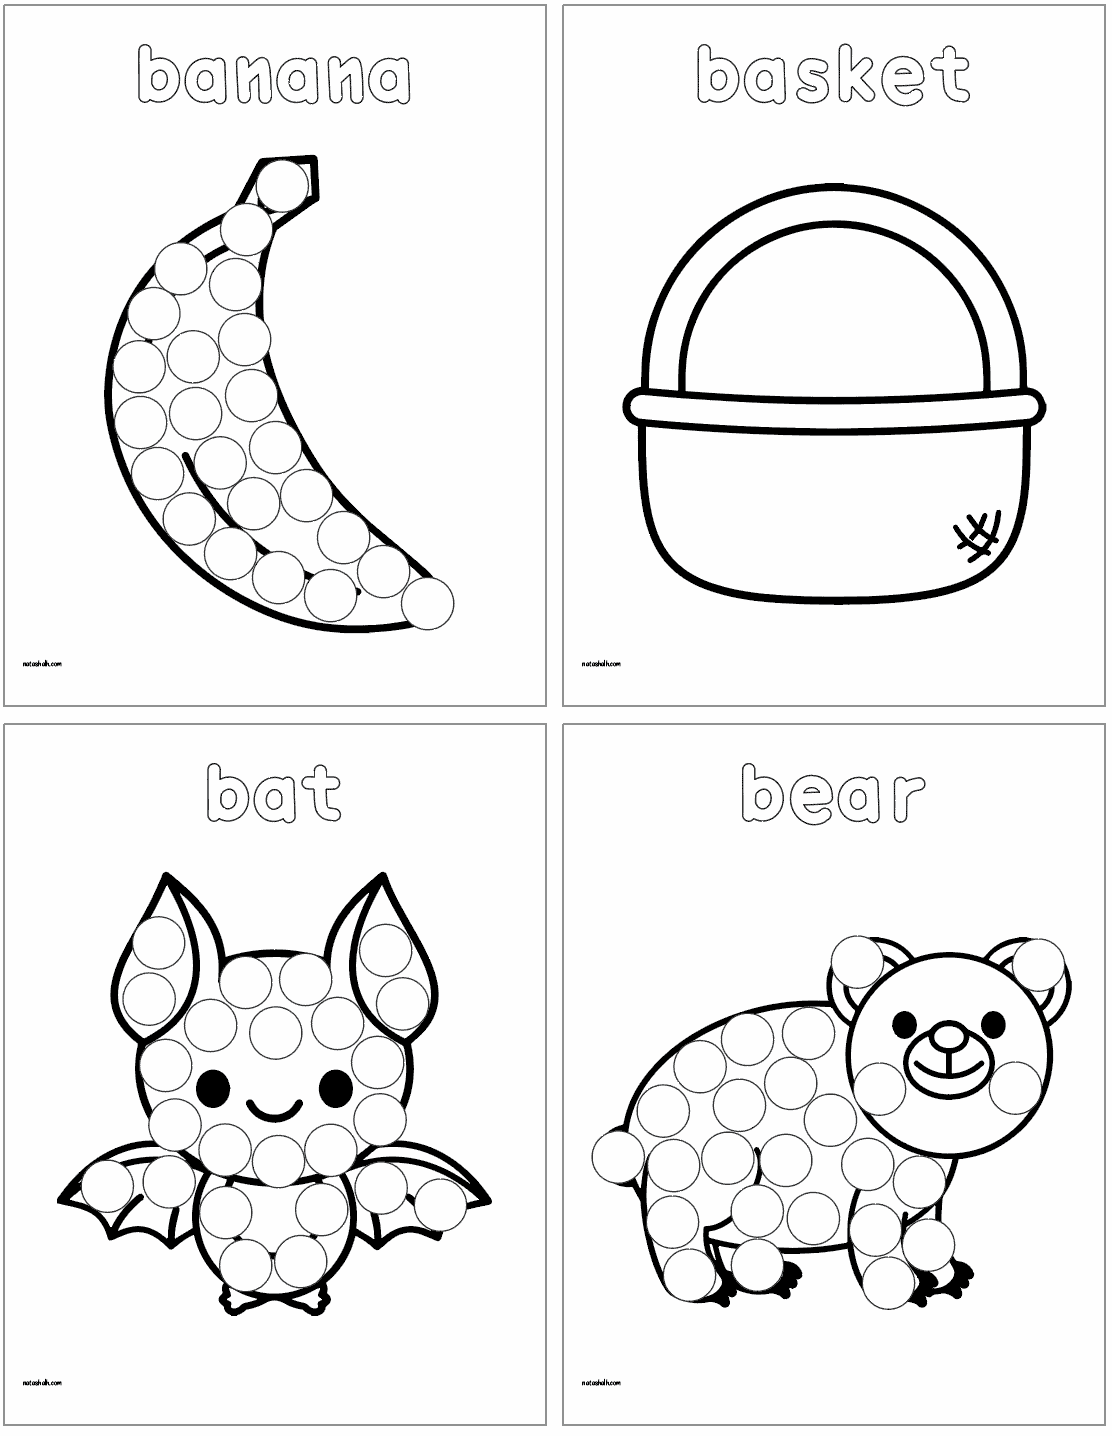 A preview of four letter b themed dot marker pages. They show: a banana, a basket, a bat, and a bear